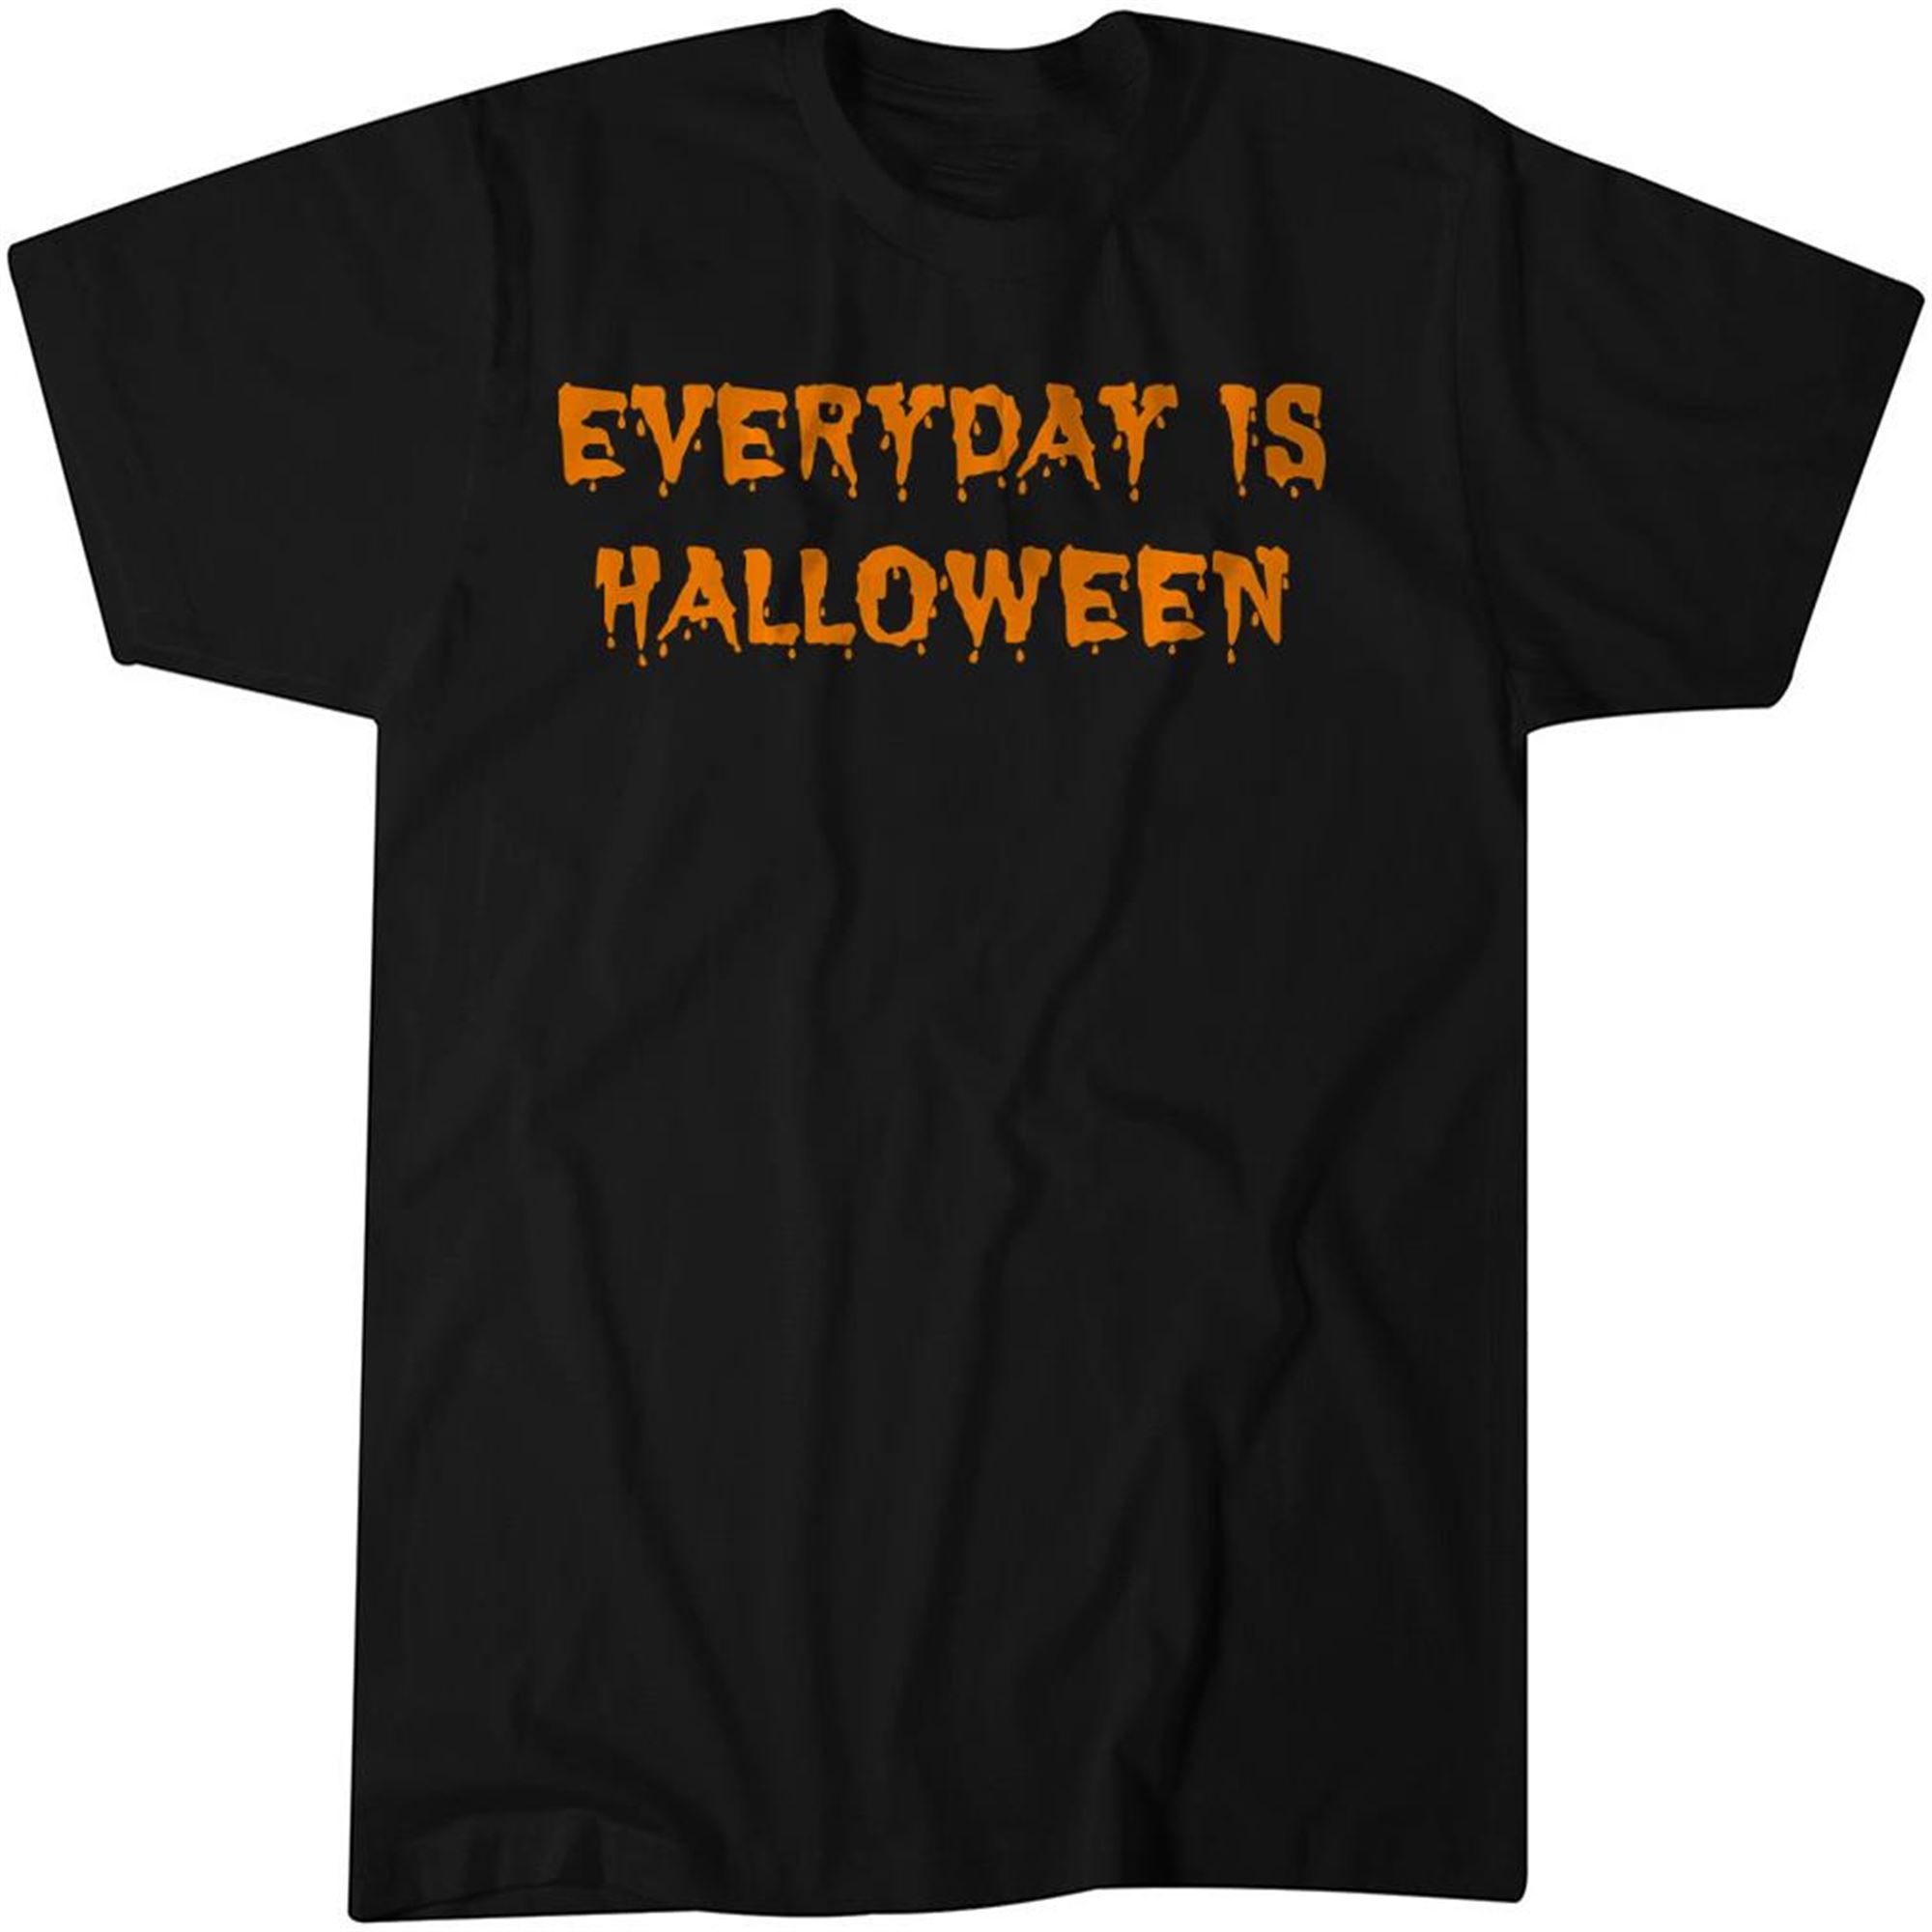 Everyday Is Halloween Fitted T-shirt Size Up To 5xl